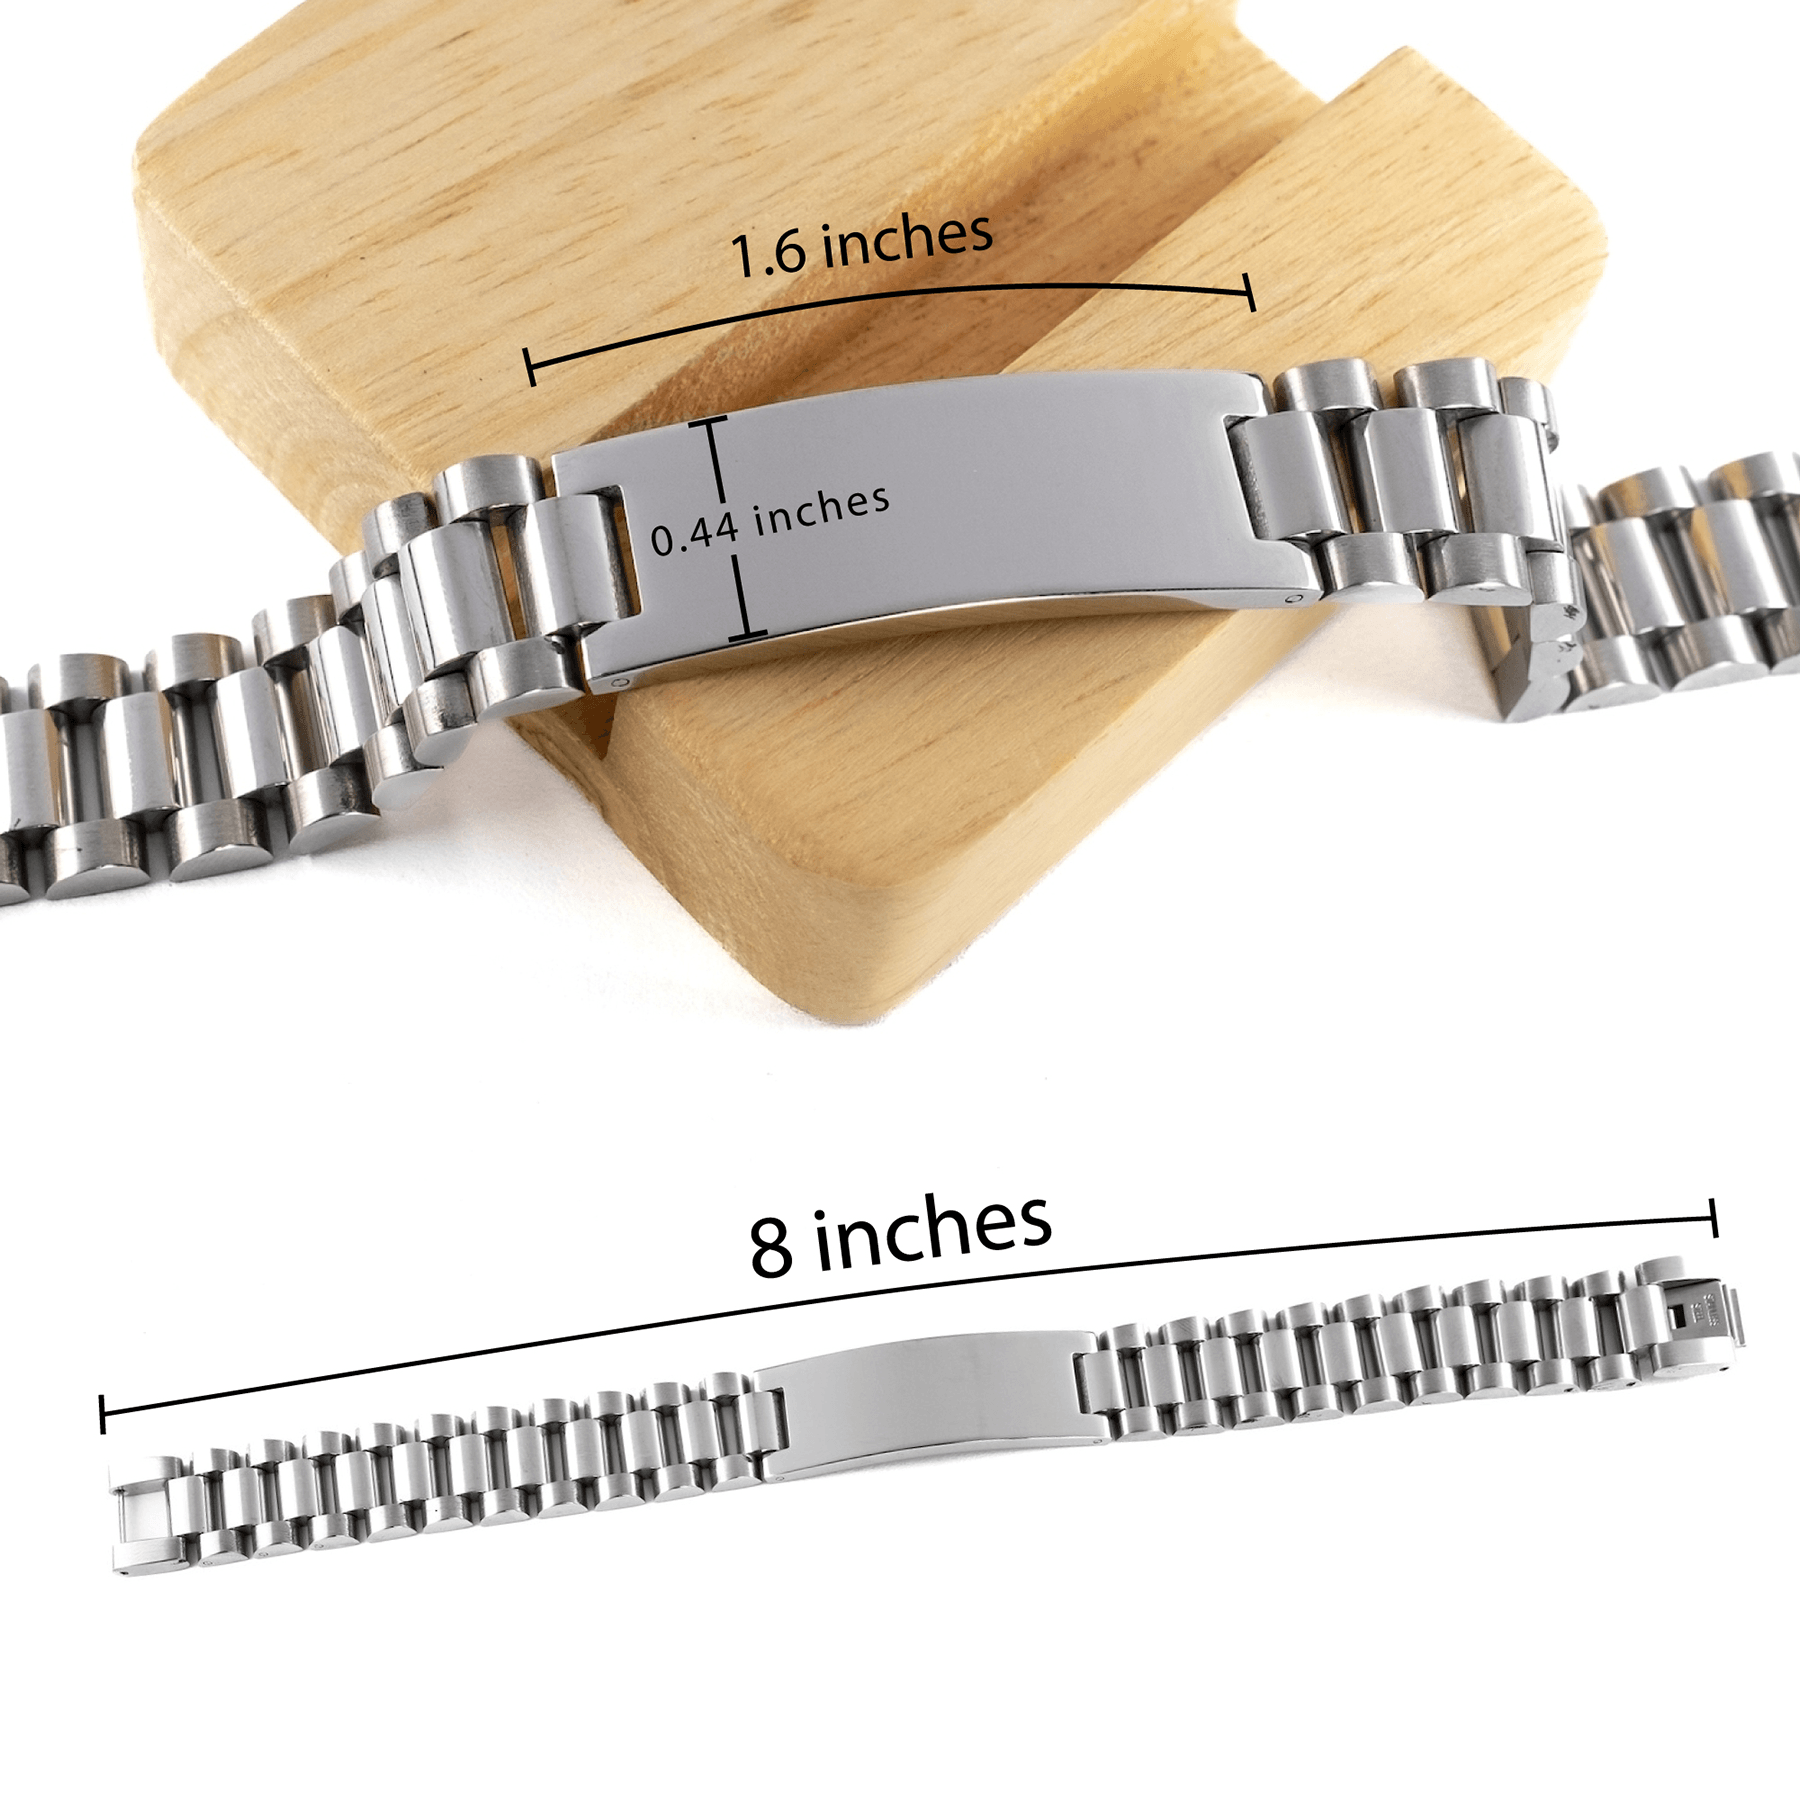 Archeologist Ladder Stainless Steel Engraved Bracelet - Thanks for being who you are - Birthday Christmas Jewelry Gifts Coworkers Colleague Boss - Mallard Moon Gift Shop